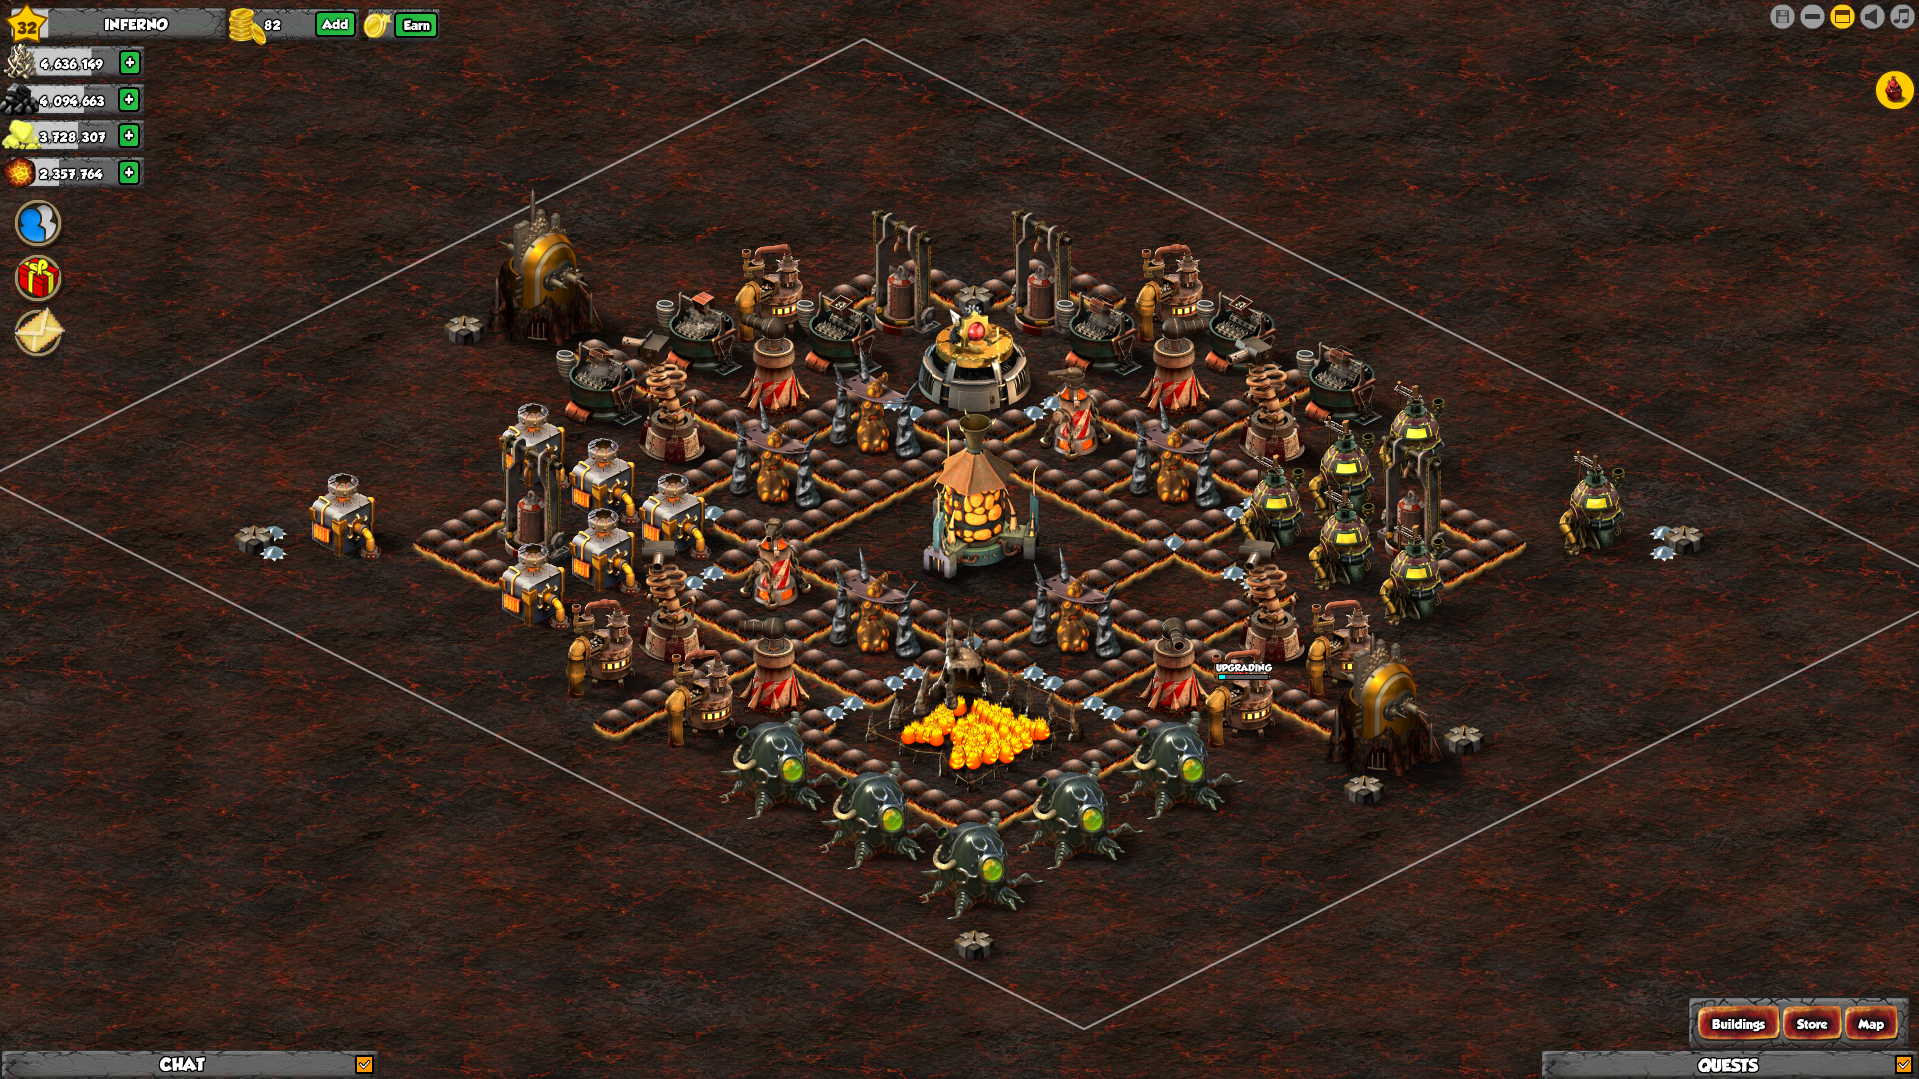 Image - Inferno base all.png | Backyard Monsters Wiki ...